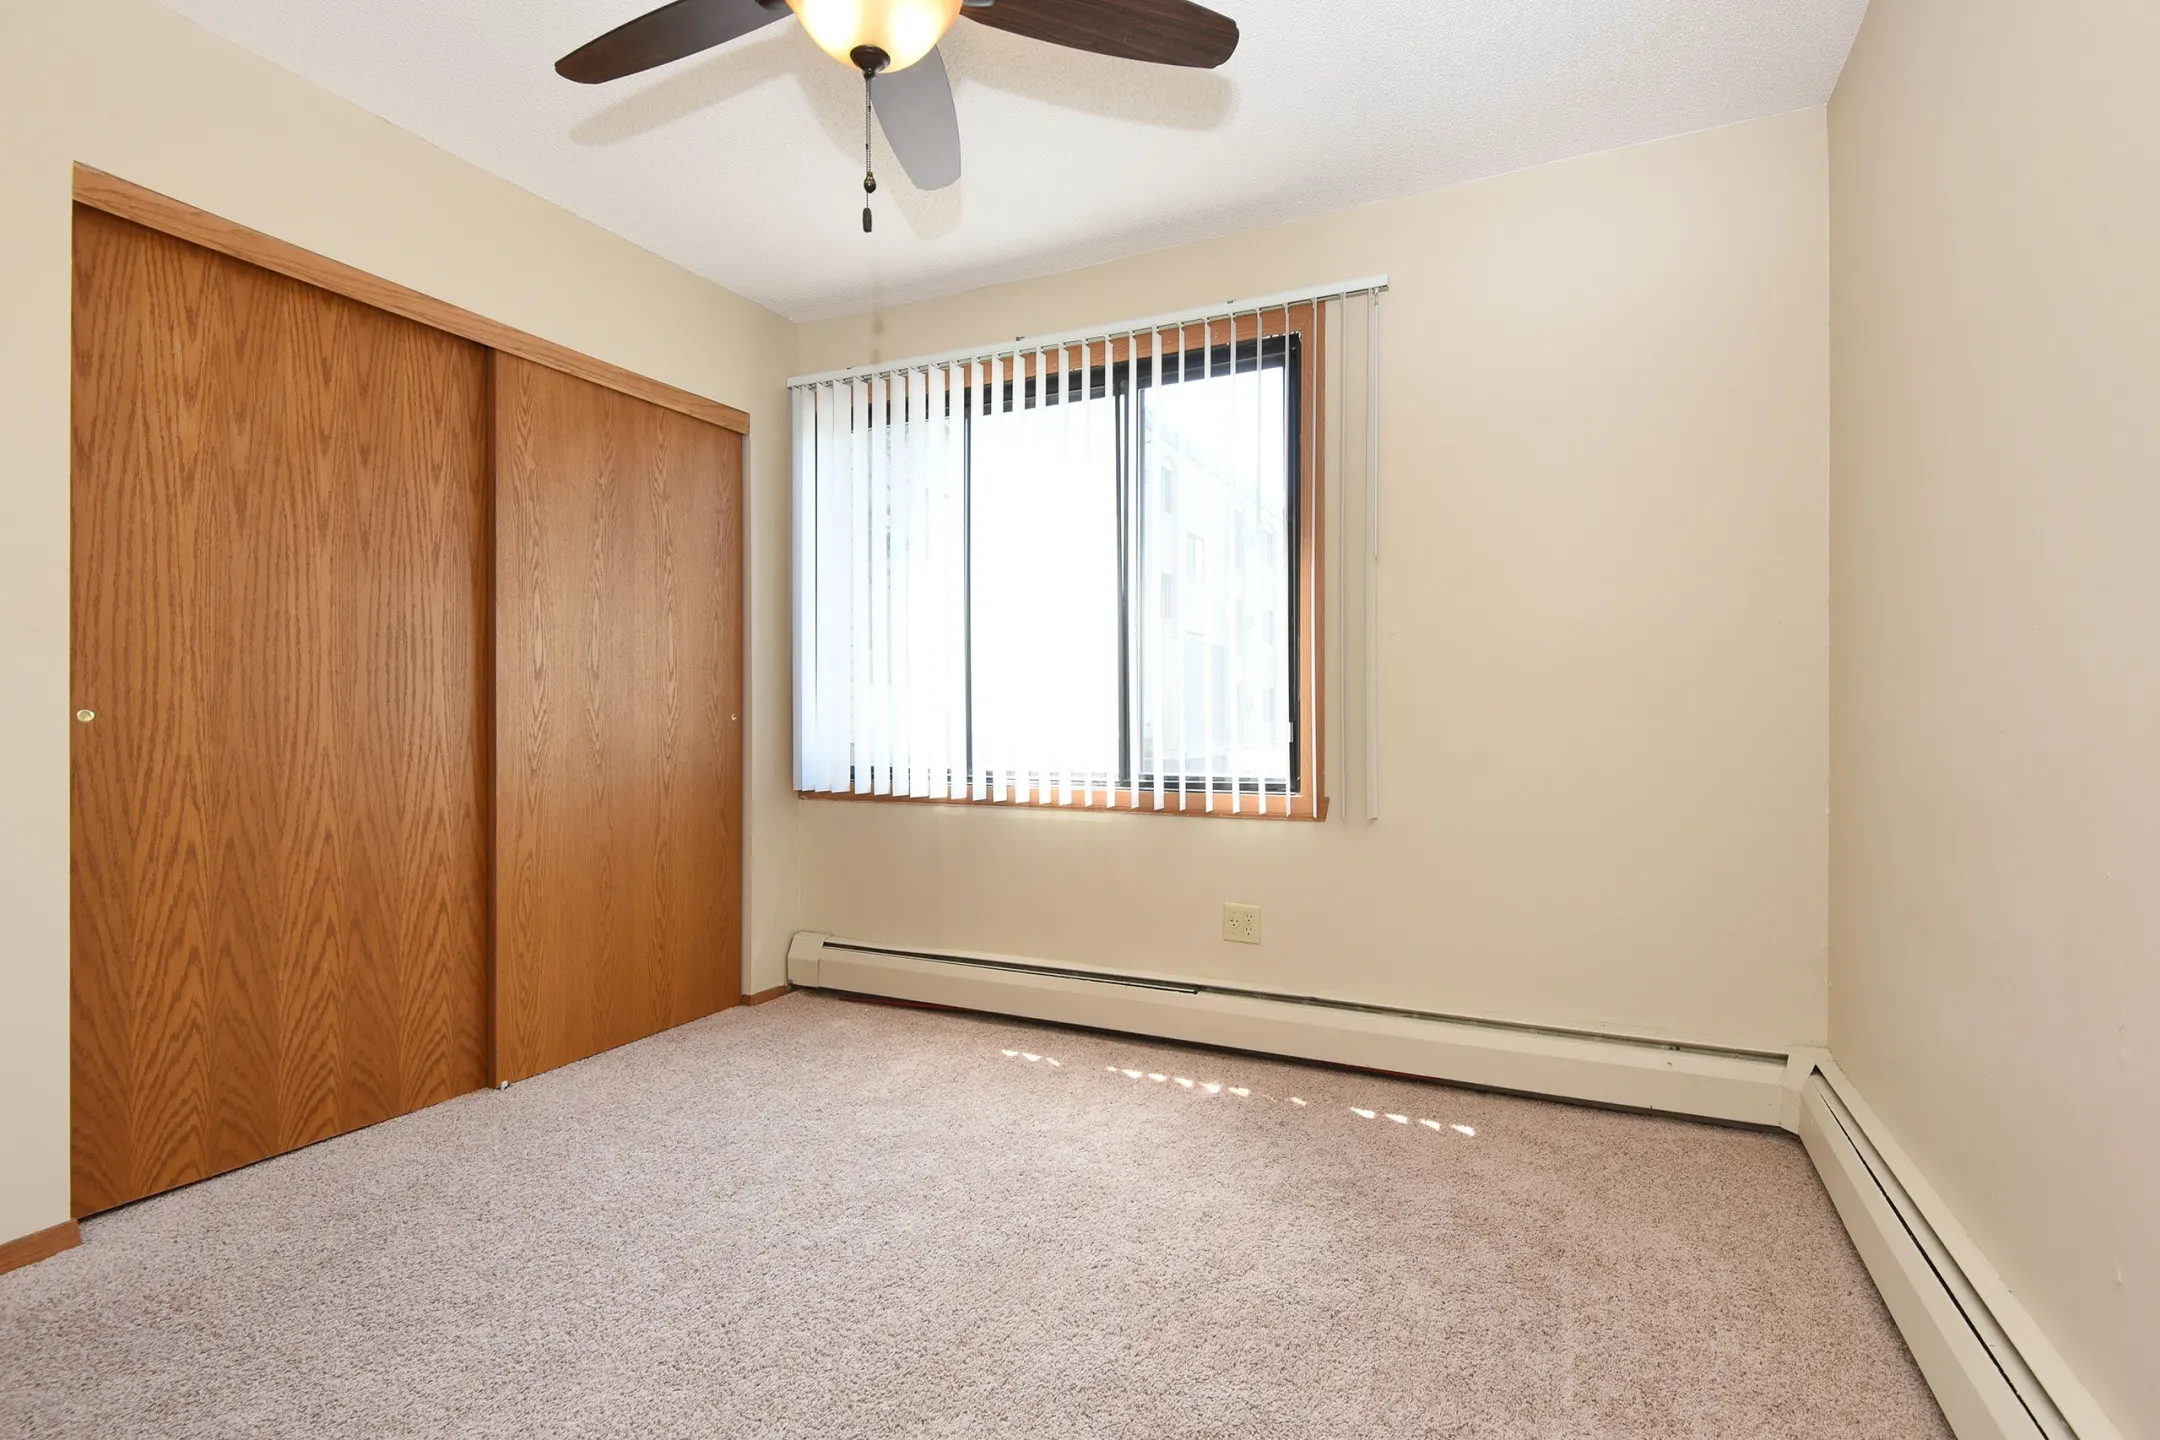 Bedroom - The Edge Of Uptown Apartments - Saint Louis Park, MN